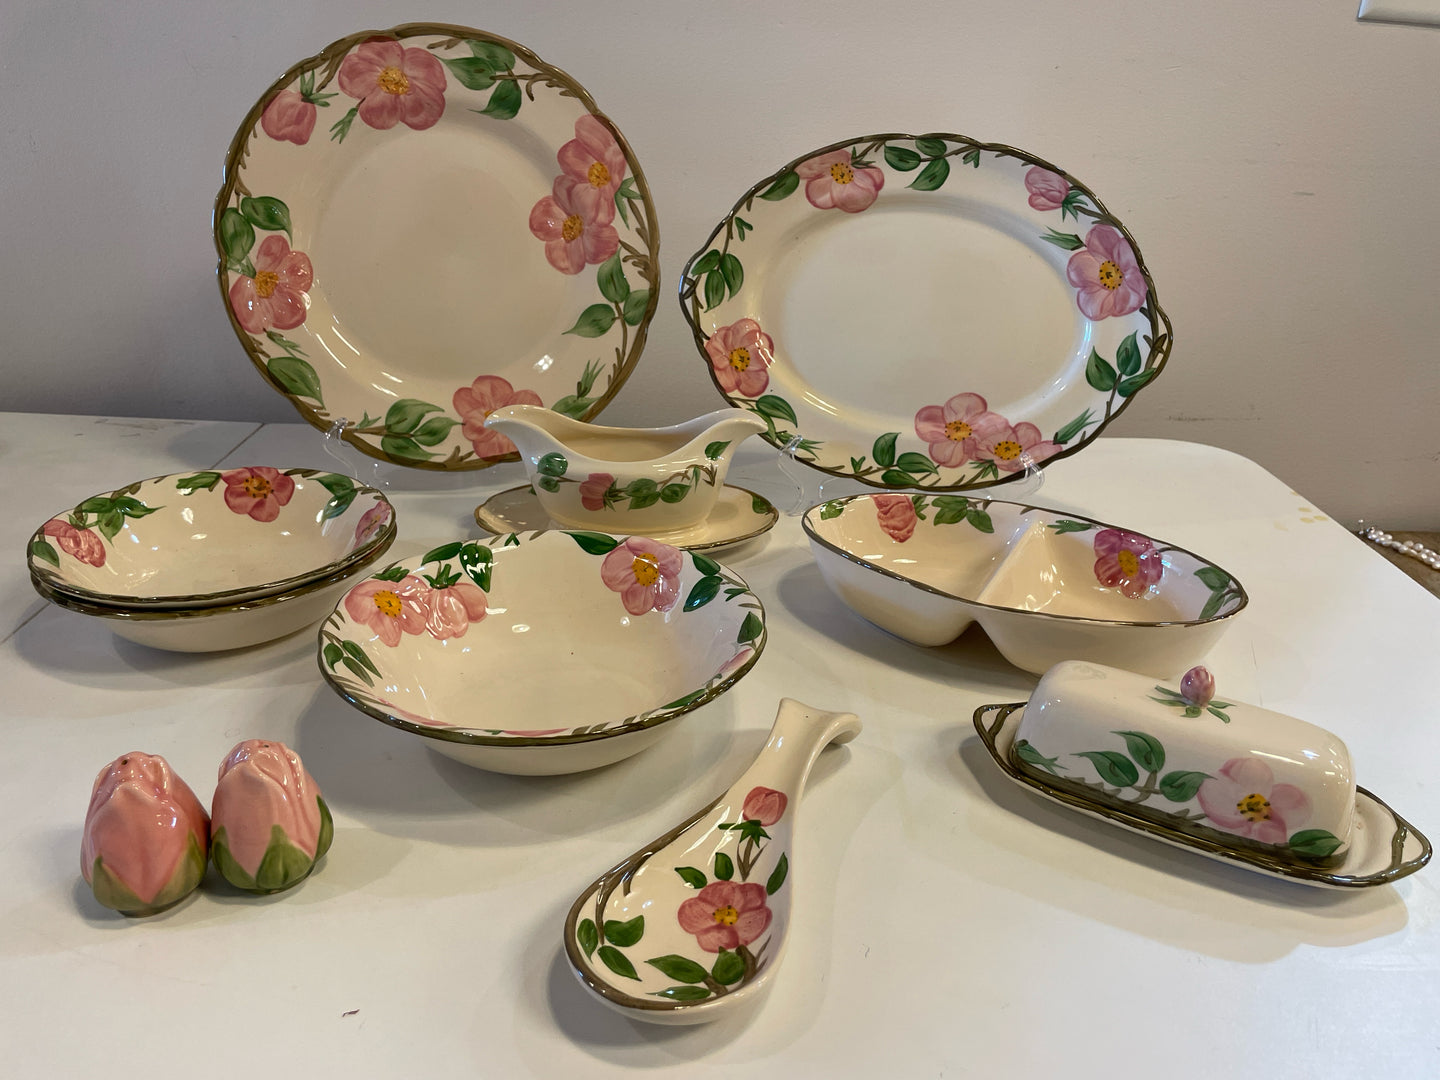 Franciscan Desert Rose China Serving Pieces